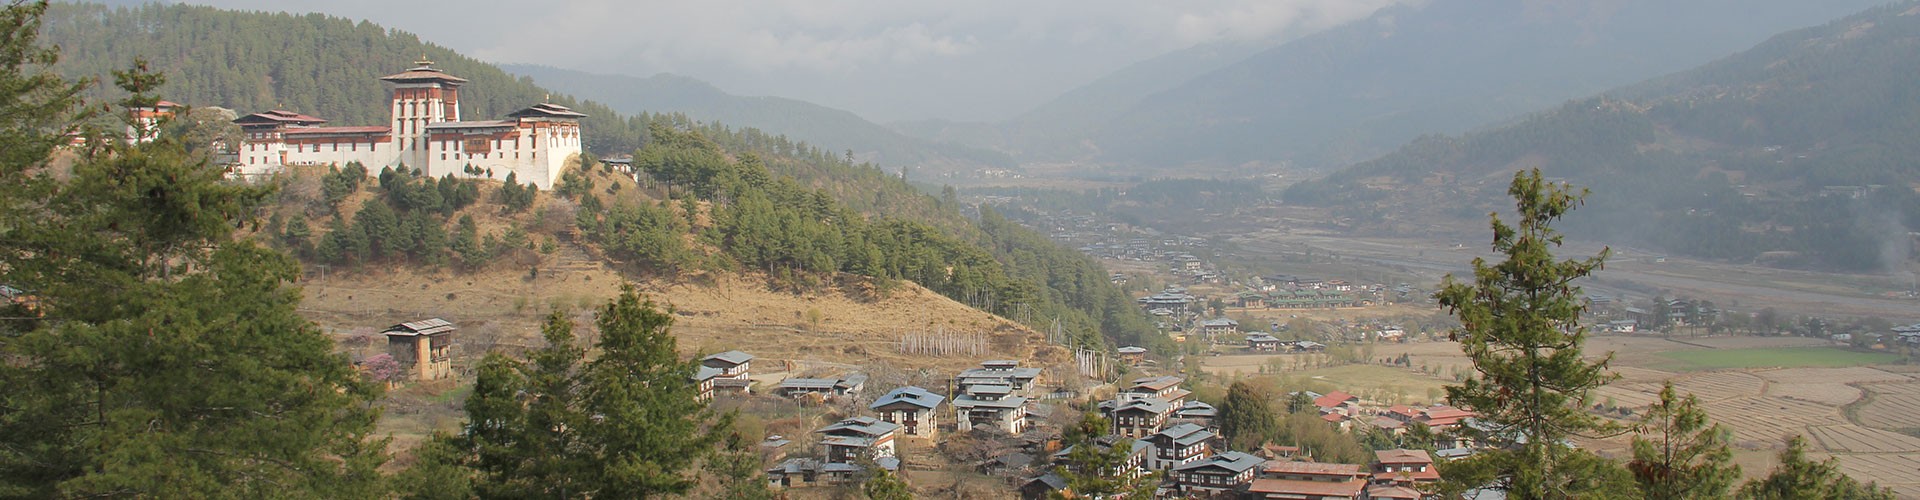 background-bumthang